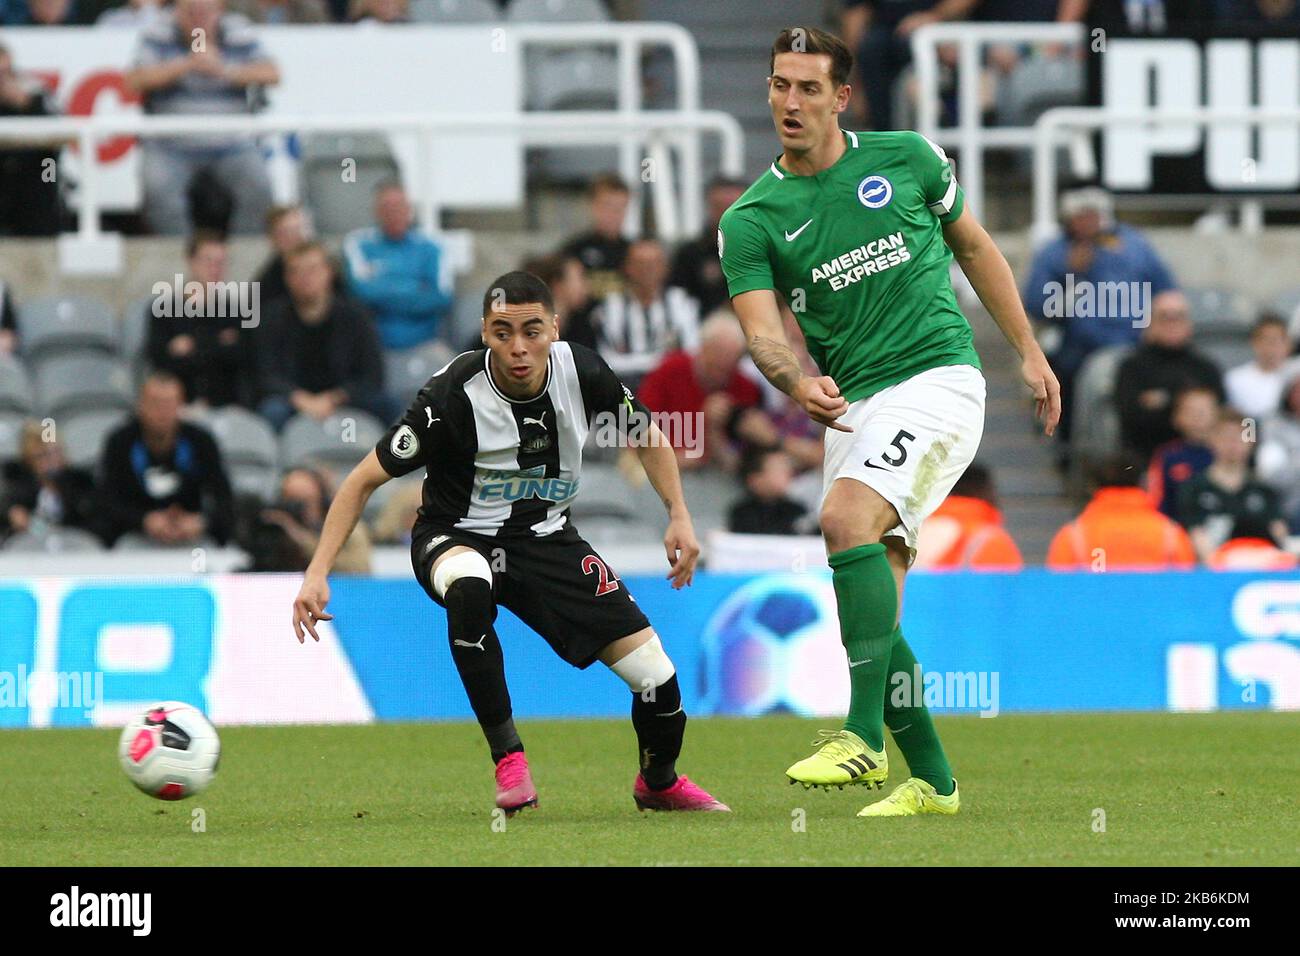 Newcastle United's Miguel Almiron competes for the ball with Brighton & Hove Albion's Lewis Dunk during the Premier League match between Newcastle United and Brighton and Hove Albion at St. James's Park, Newcastle on Saturday 21st September 2019. (Photo by Steven Hadlow/MI News/NurPhoto) Stock Photo